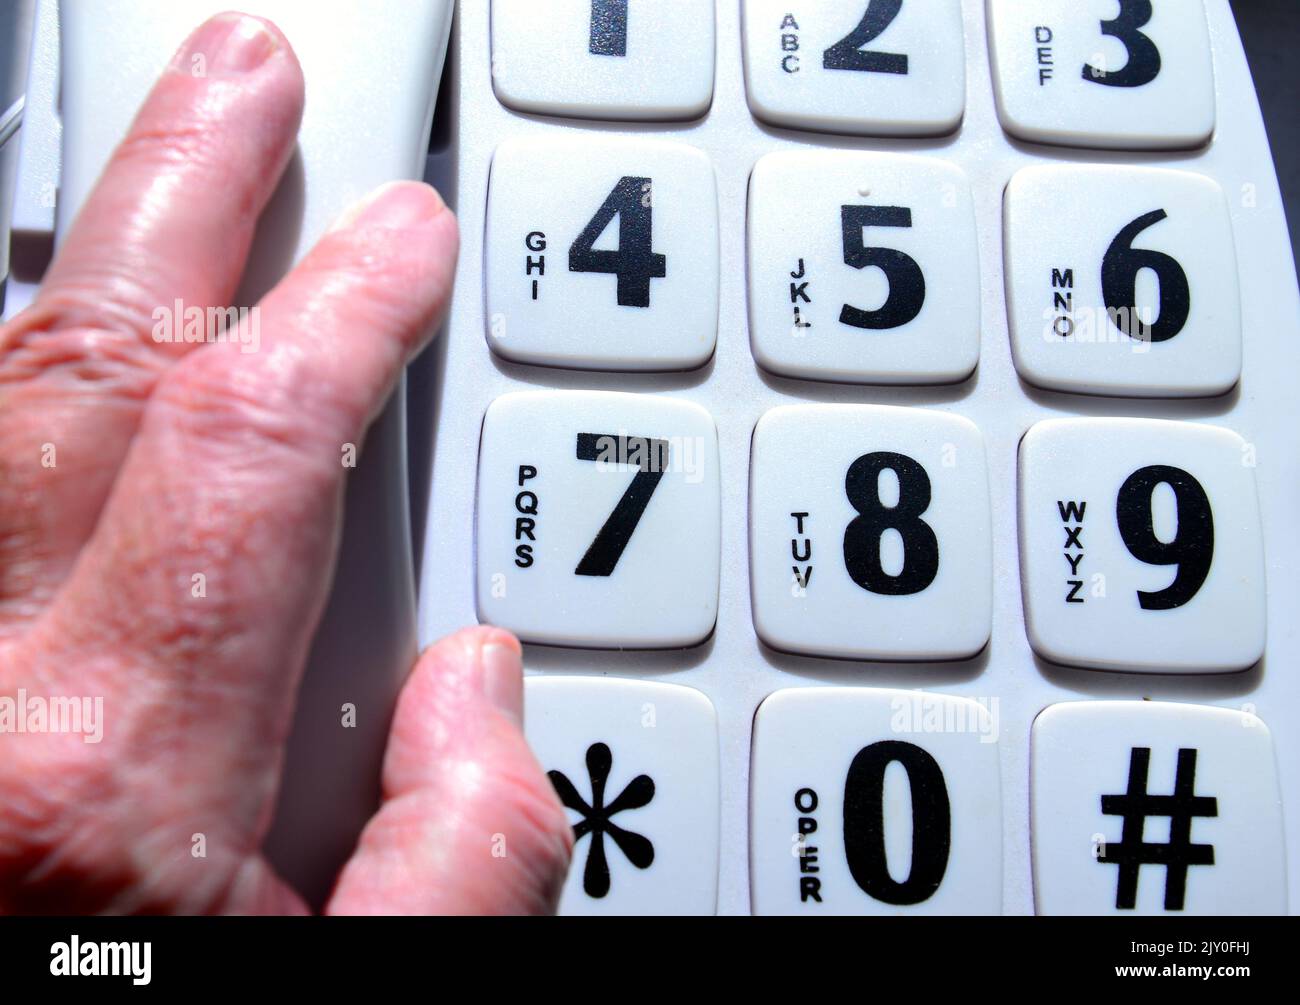 The hand of a senior or older man picks up the handset of a big button landline telephone which is aimed at elderly, disabled and sight impaired users Stock Photo